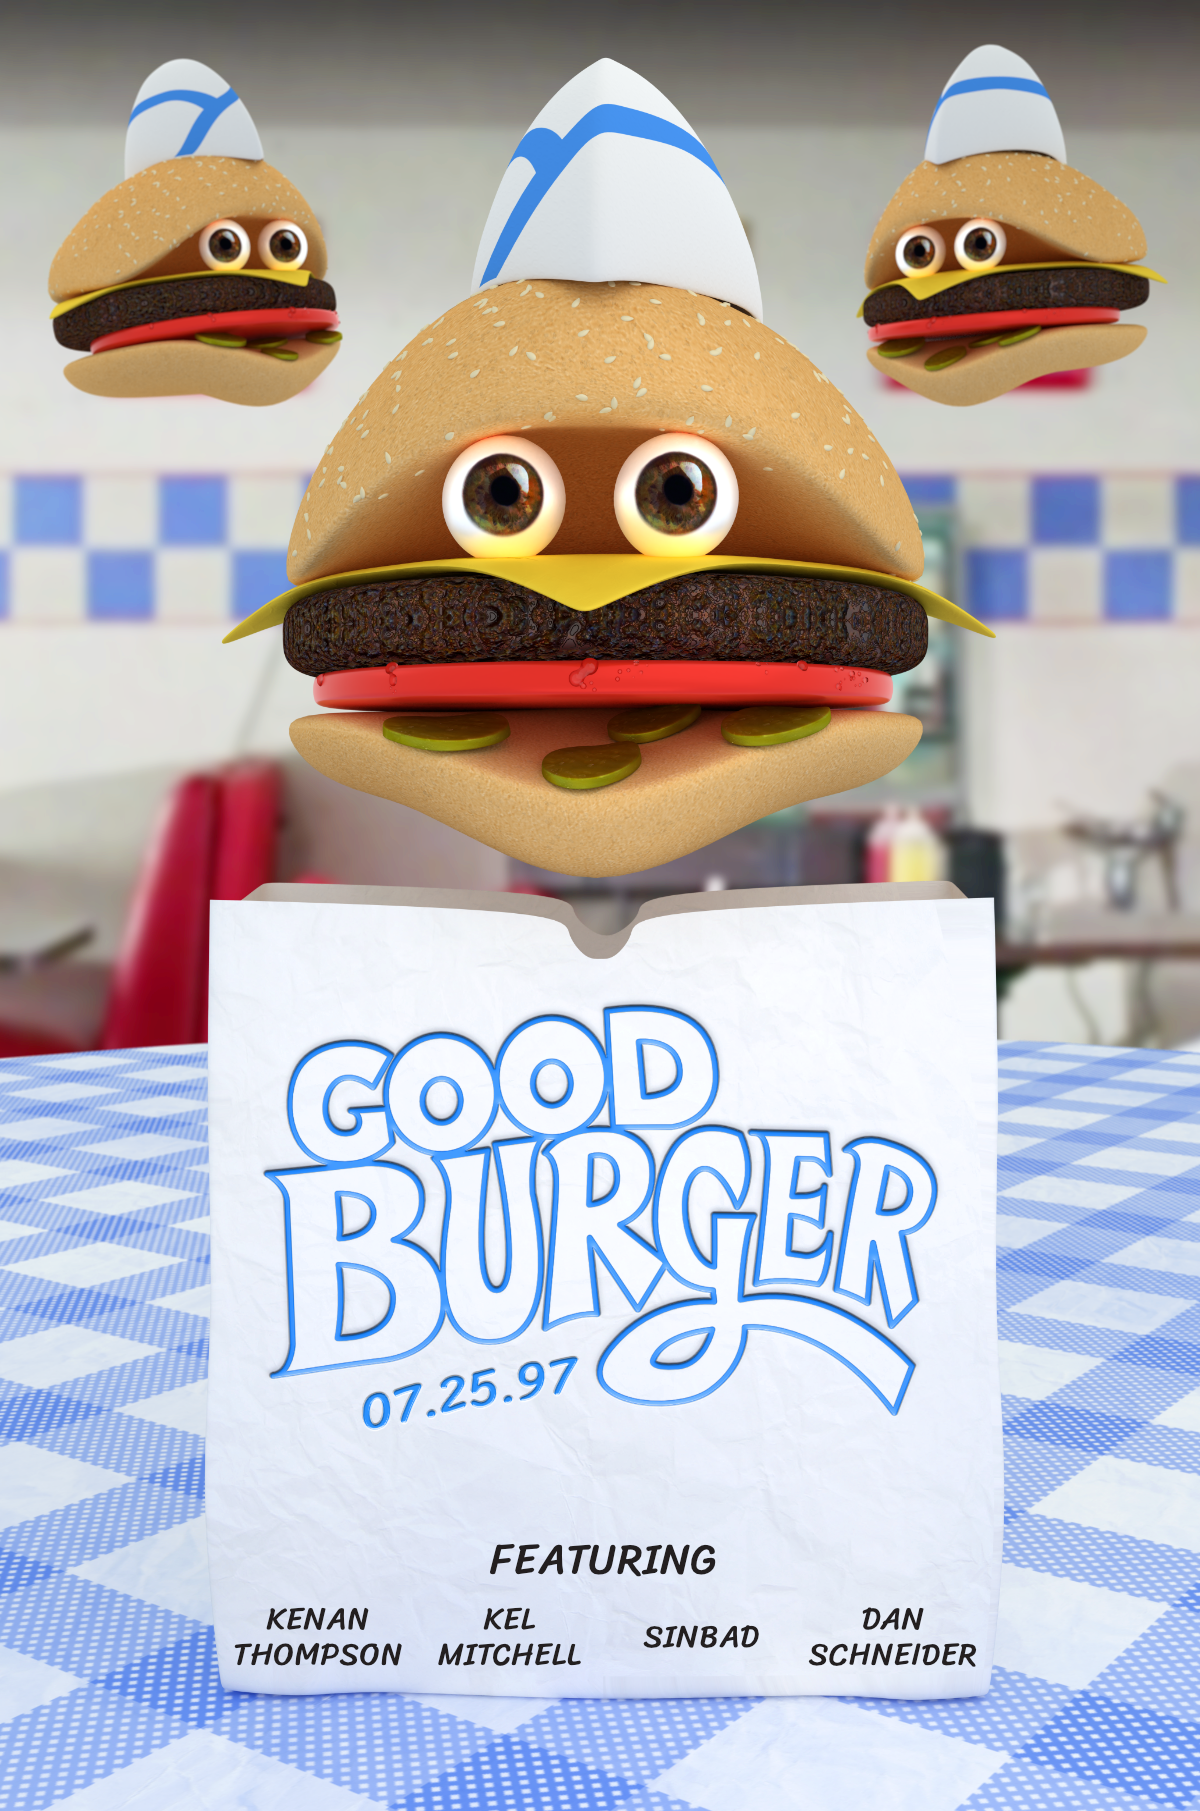 Three burgers flying above the Good Burger takeout bag with date of release and actors